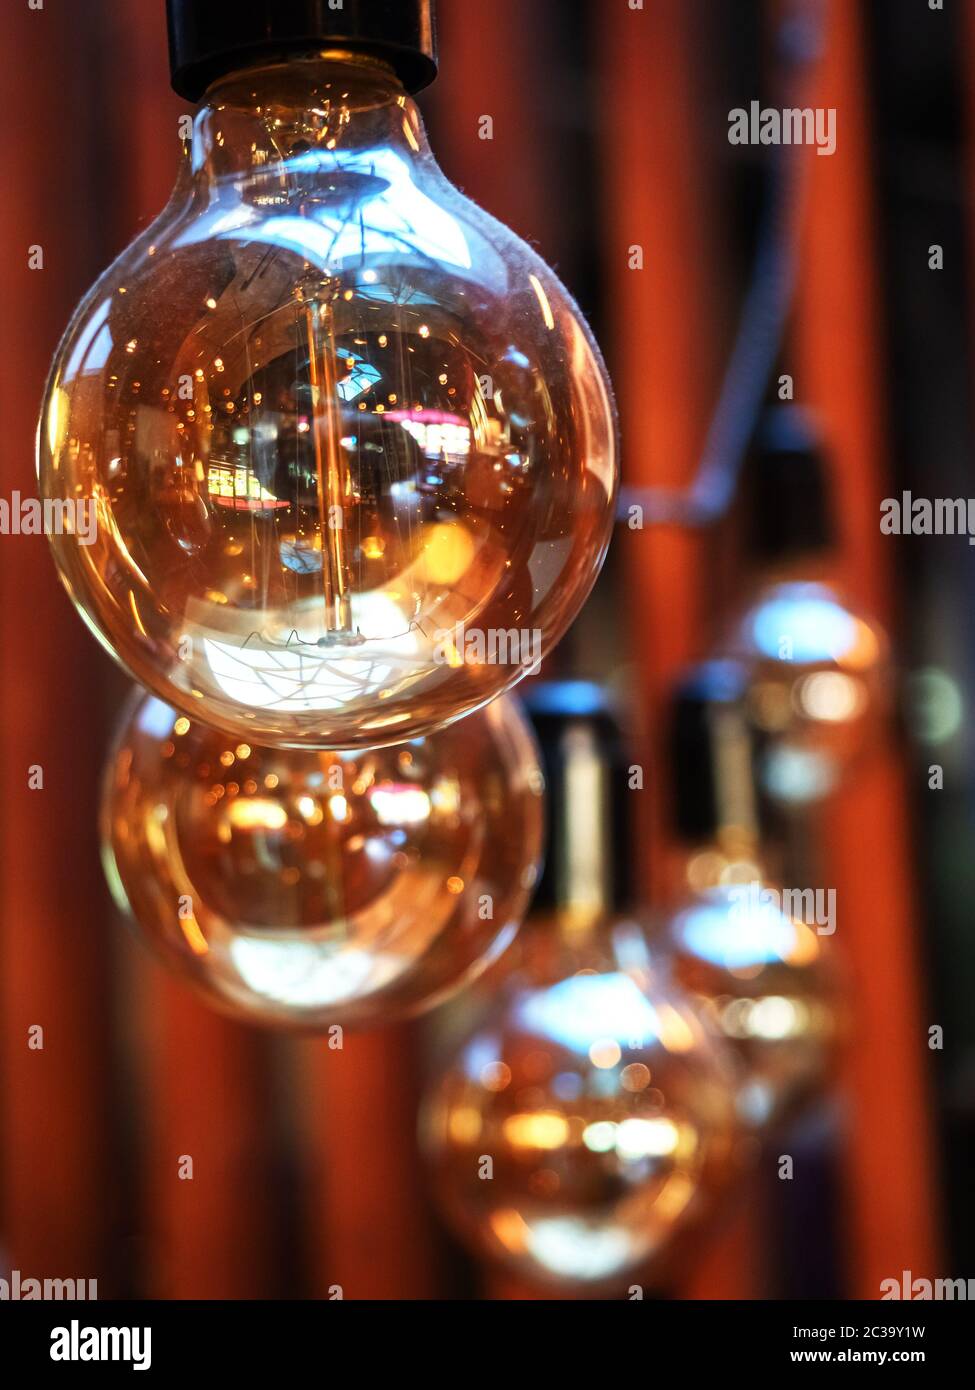 Vertical image of transparent glossy bulbs with interior reflecting in them. Stock Photo